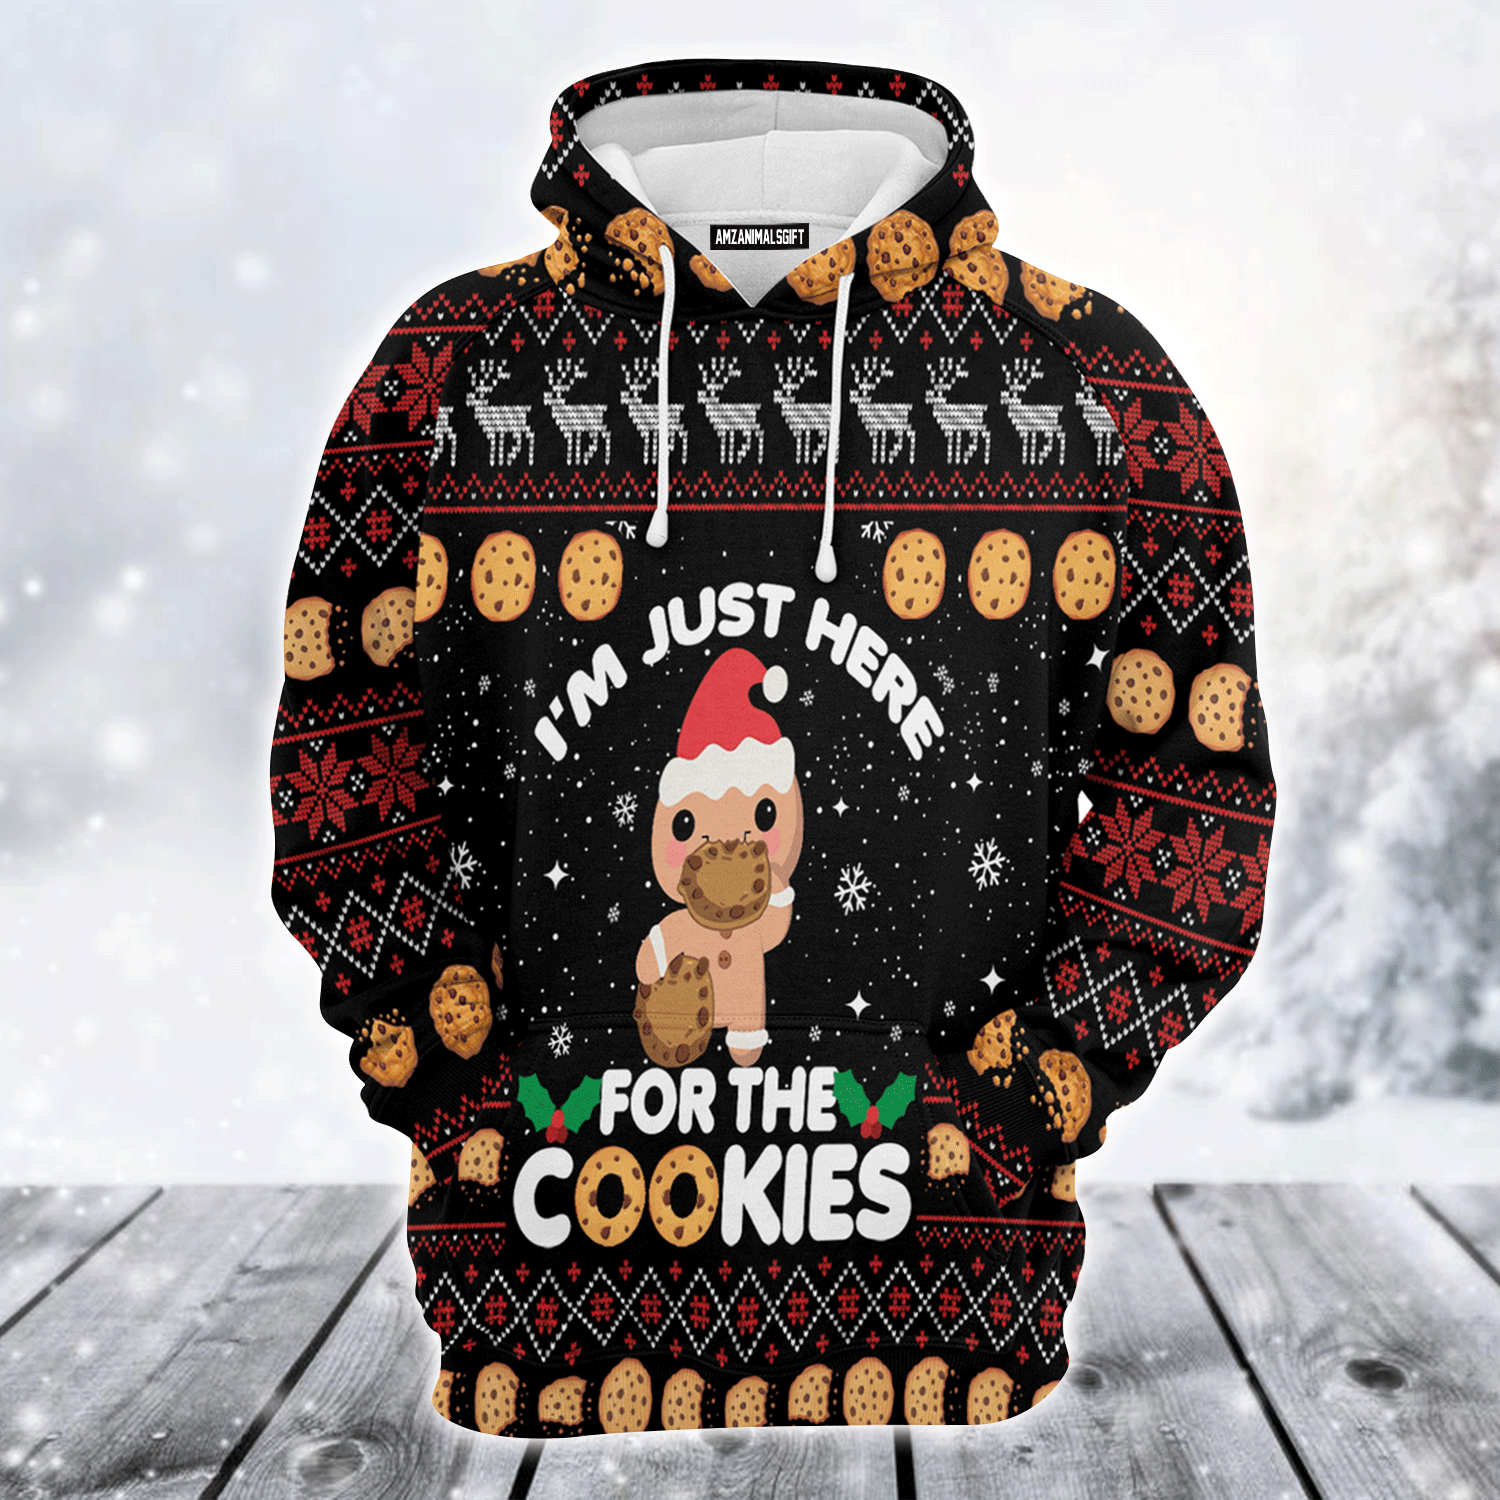 Cookies Premium Christmas Hoodie, Just Here For The Cookies Unisex Hoodie For Men & Women - Perfect Gift For Christmas, Friends, Family